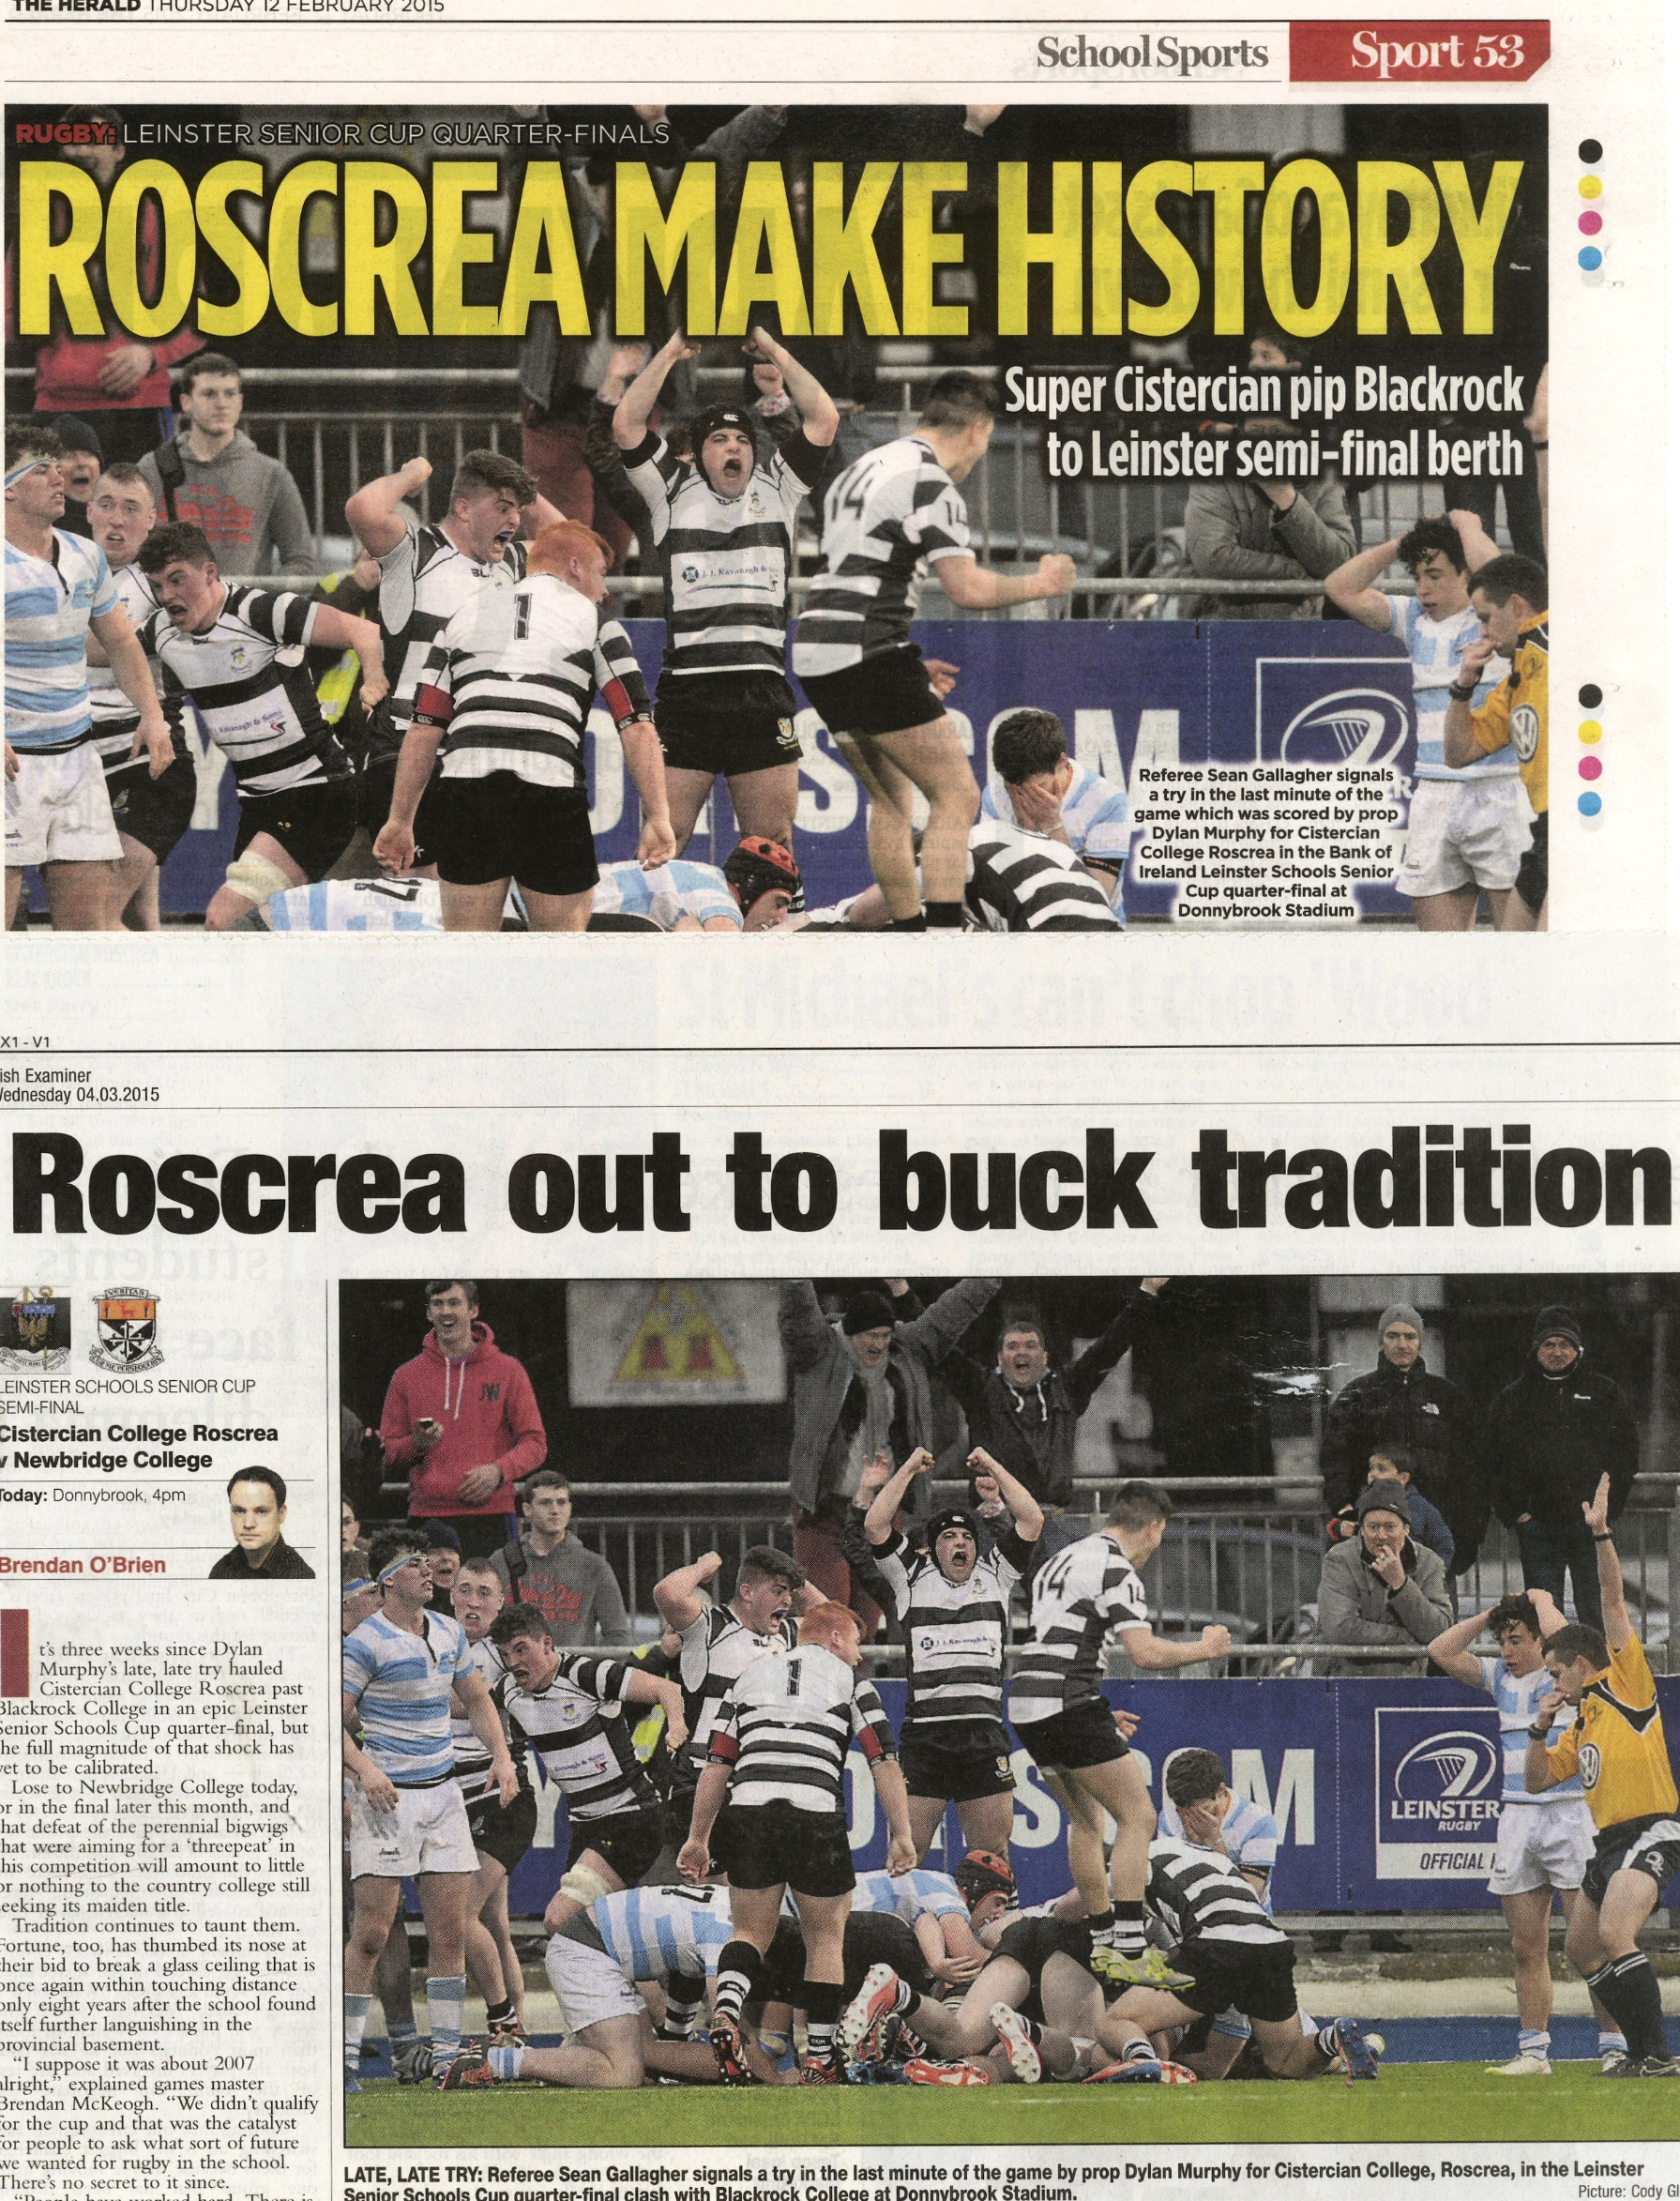  Cistercian College Roscrea upset Blackrock College with a last-minute try in the Leinster Schools Rugby quarterfinals at Donnybrook Stadium February 12 2015  The Herald / Irish Examiner  